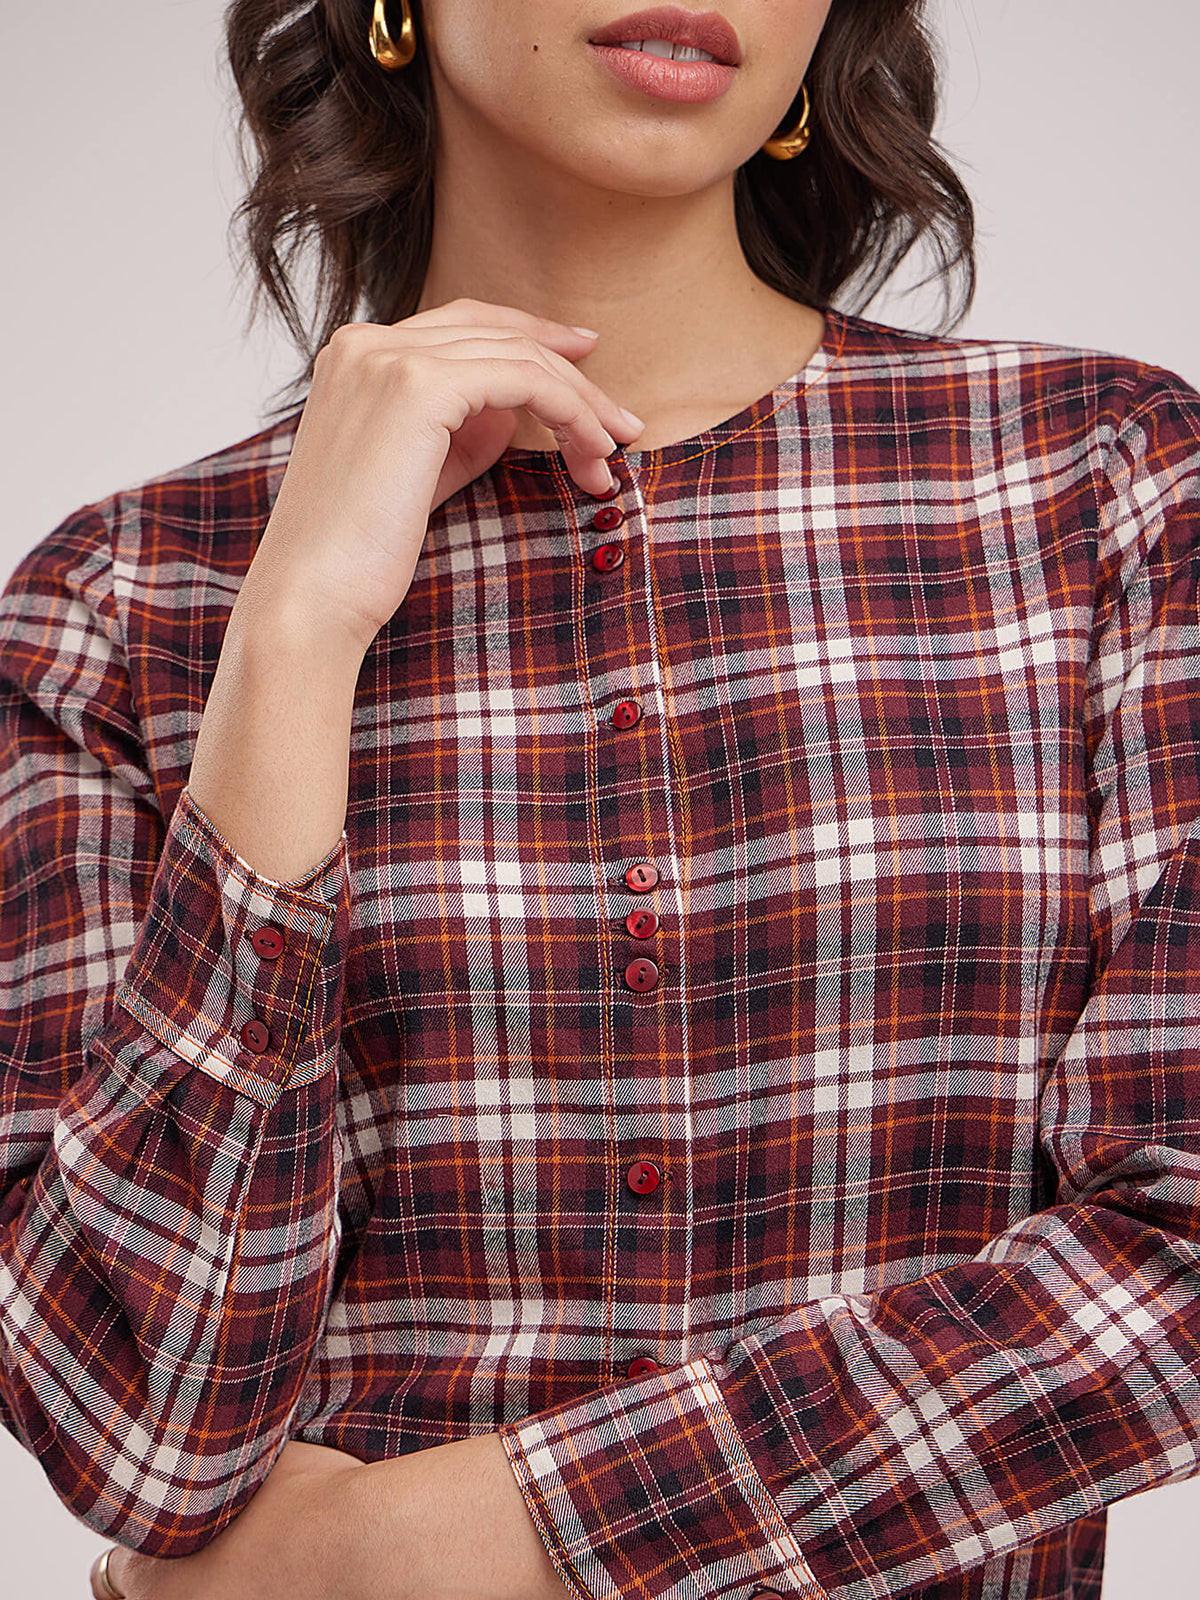 Round Neck Plaid Top - Maroon And White